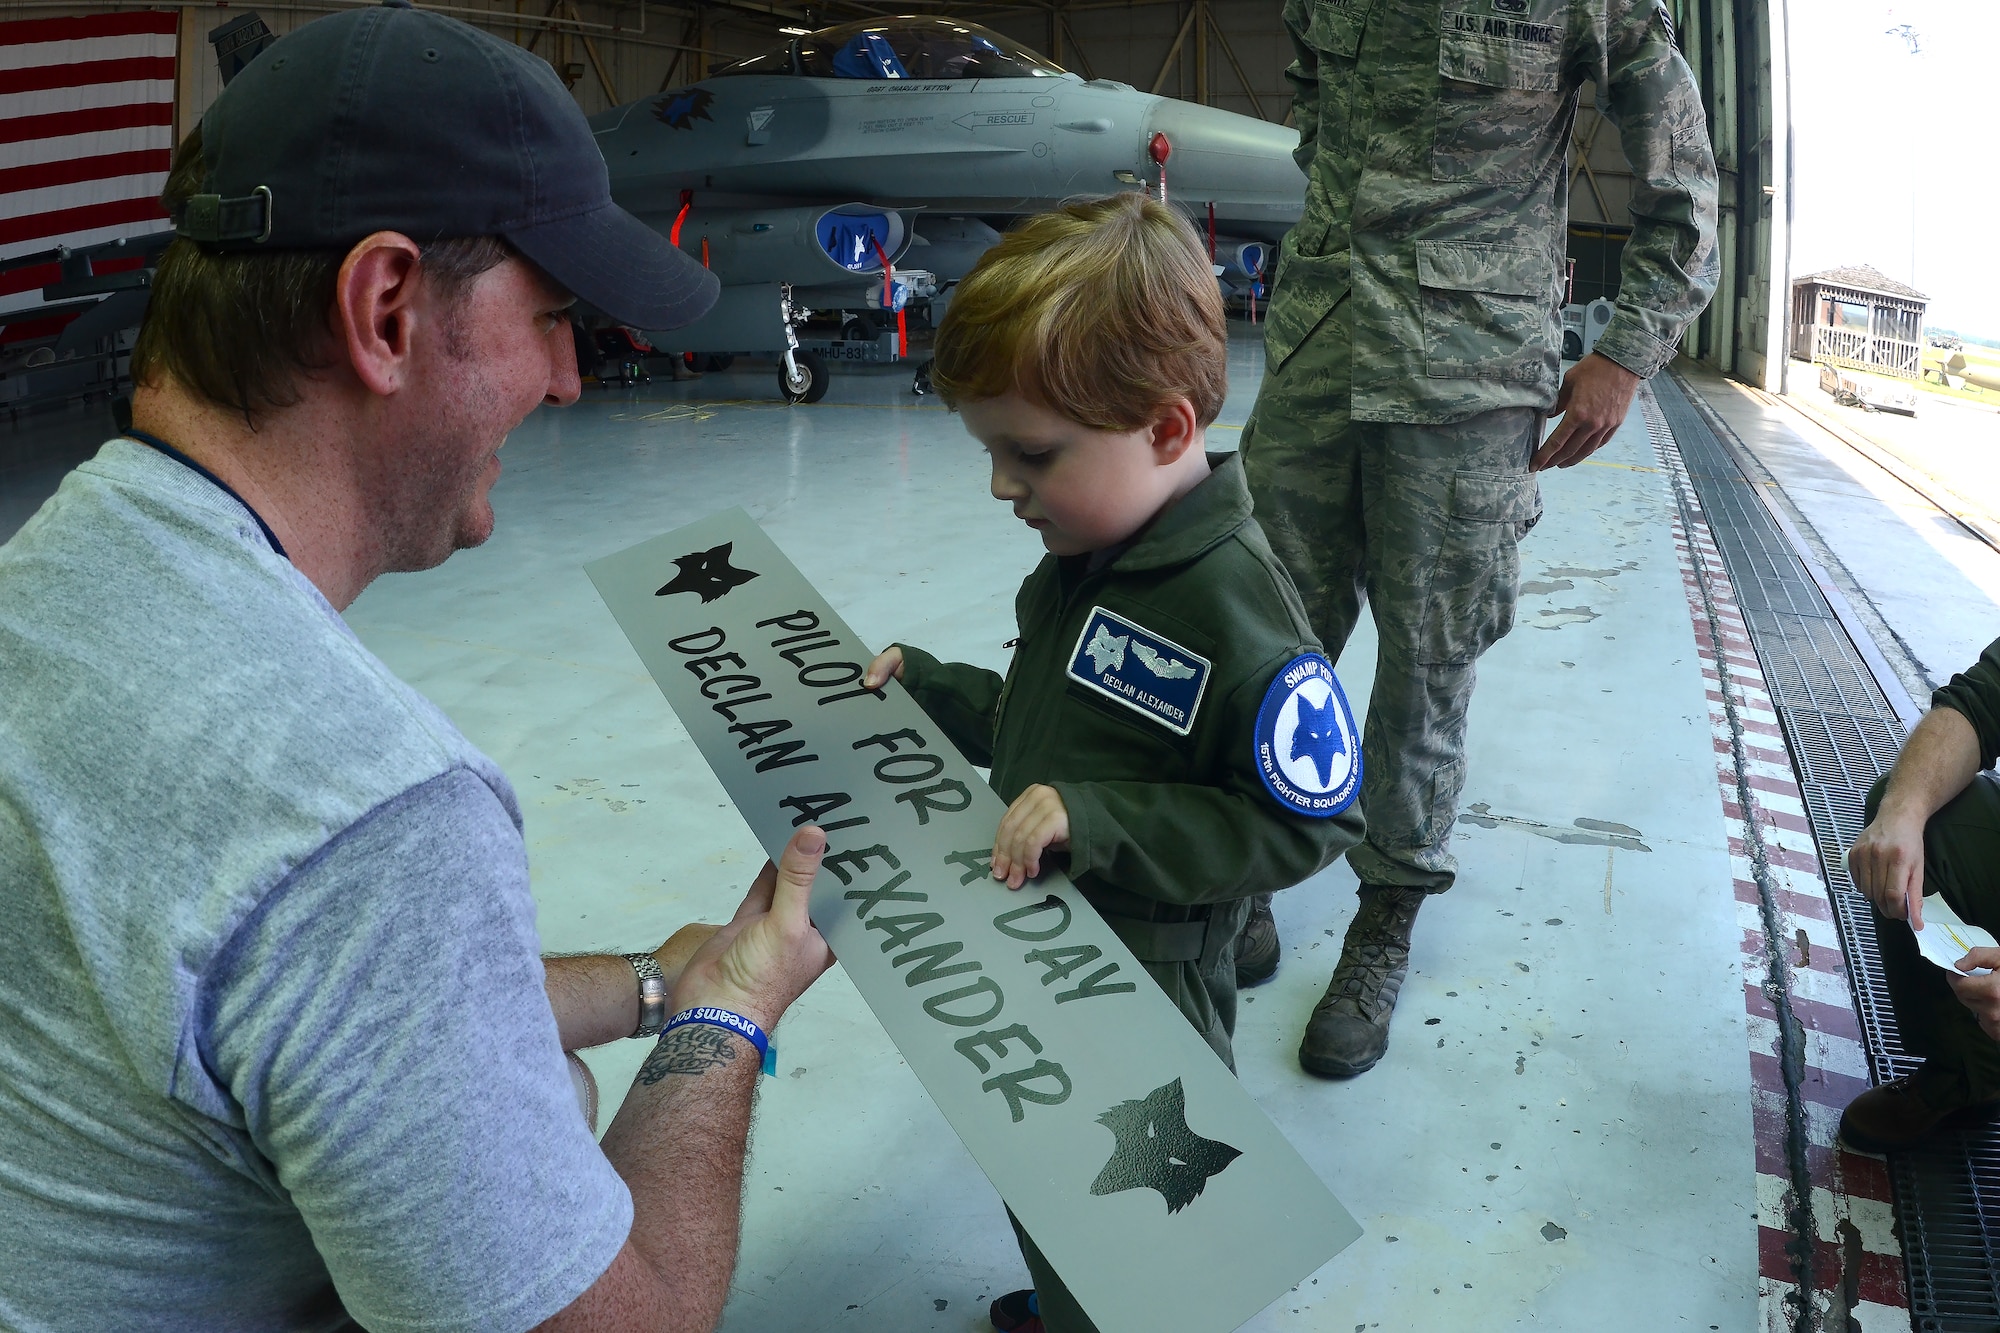 Declan Alexander visits McEntire Joint National Guard Base, Eastover, S.C., as the Swamp Fox “Pilot for a Day”, Aug. 15, 2015. Declan spent the day with U.S. Air Force 1st Lt. Cody "Rail" May, a fighter pilot with the 157th Fighter Squadron, and watched F-16 fighter jets land, toured aircrew flight equipment, sat in the cockpit of an F-16, and took a ride in a fire truck. The Pilot for a Day program is an opportunity for disadvantaged or seriously ill children to spend a day with members of the South Carolina Air National Guard. (S.C. Air National Guard photo by Airman 1st Class Ashleigh Pavelek/Released)